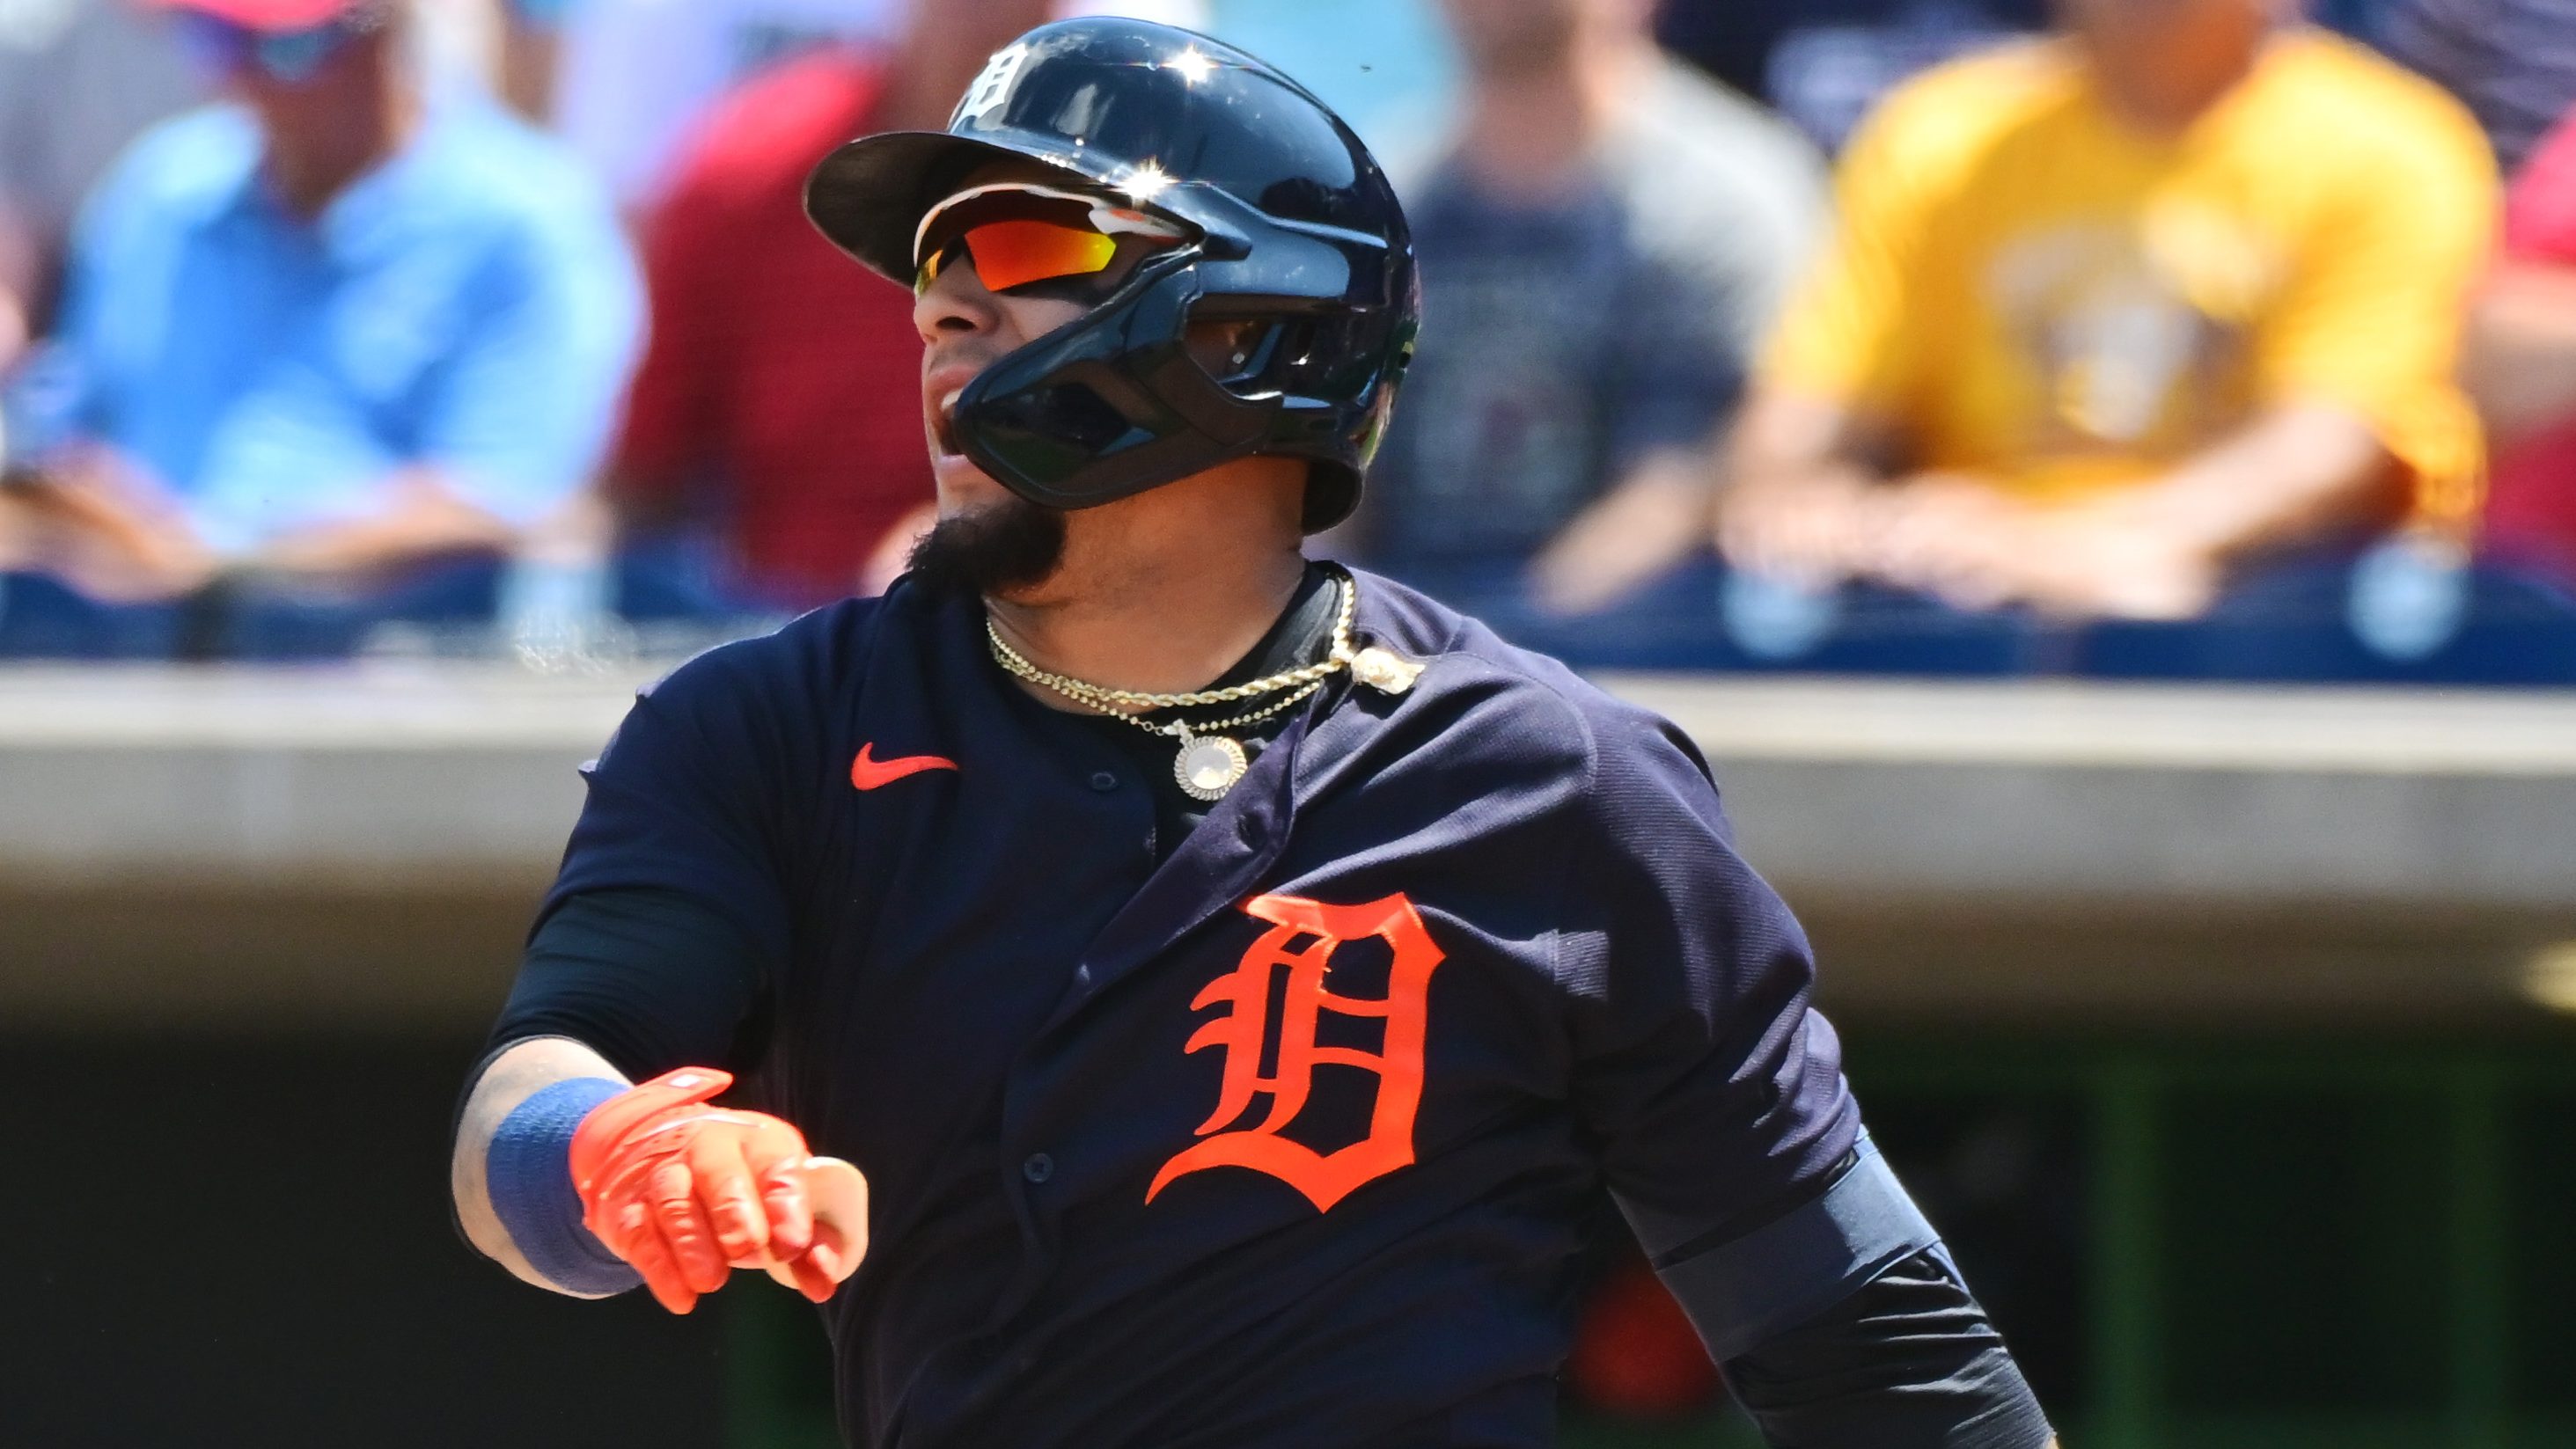 How to Watch the Tigers vs. Reds Game: Streaming & TV Info